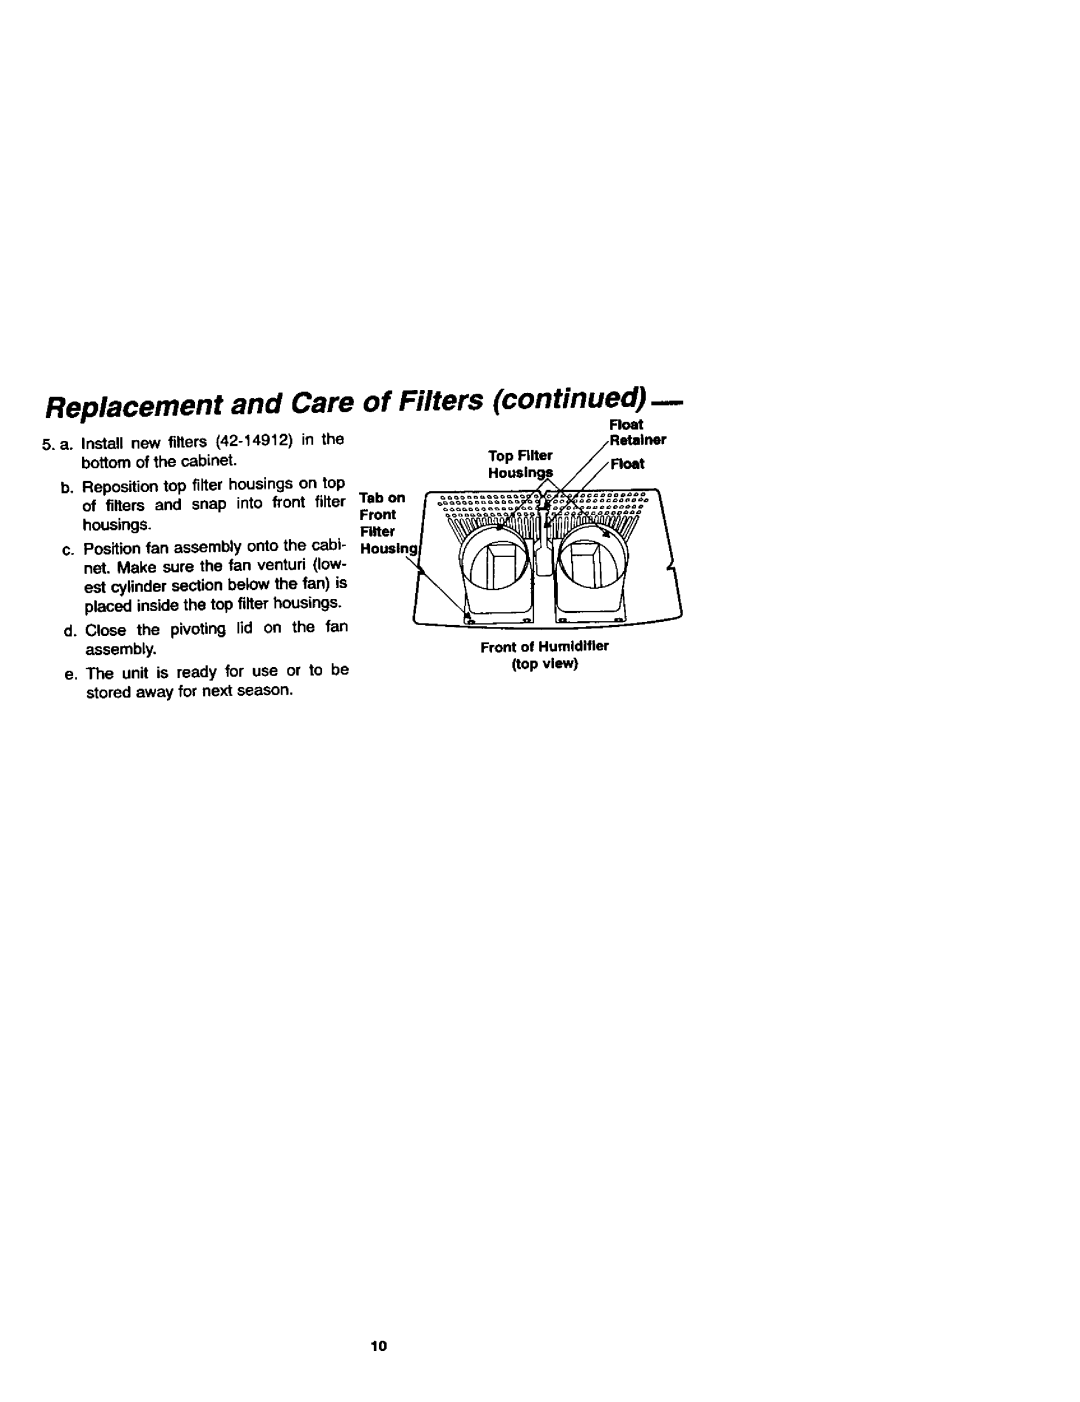 Sears 758.144131 owner manual Replacement and Care, of Filters continued, Retainer 